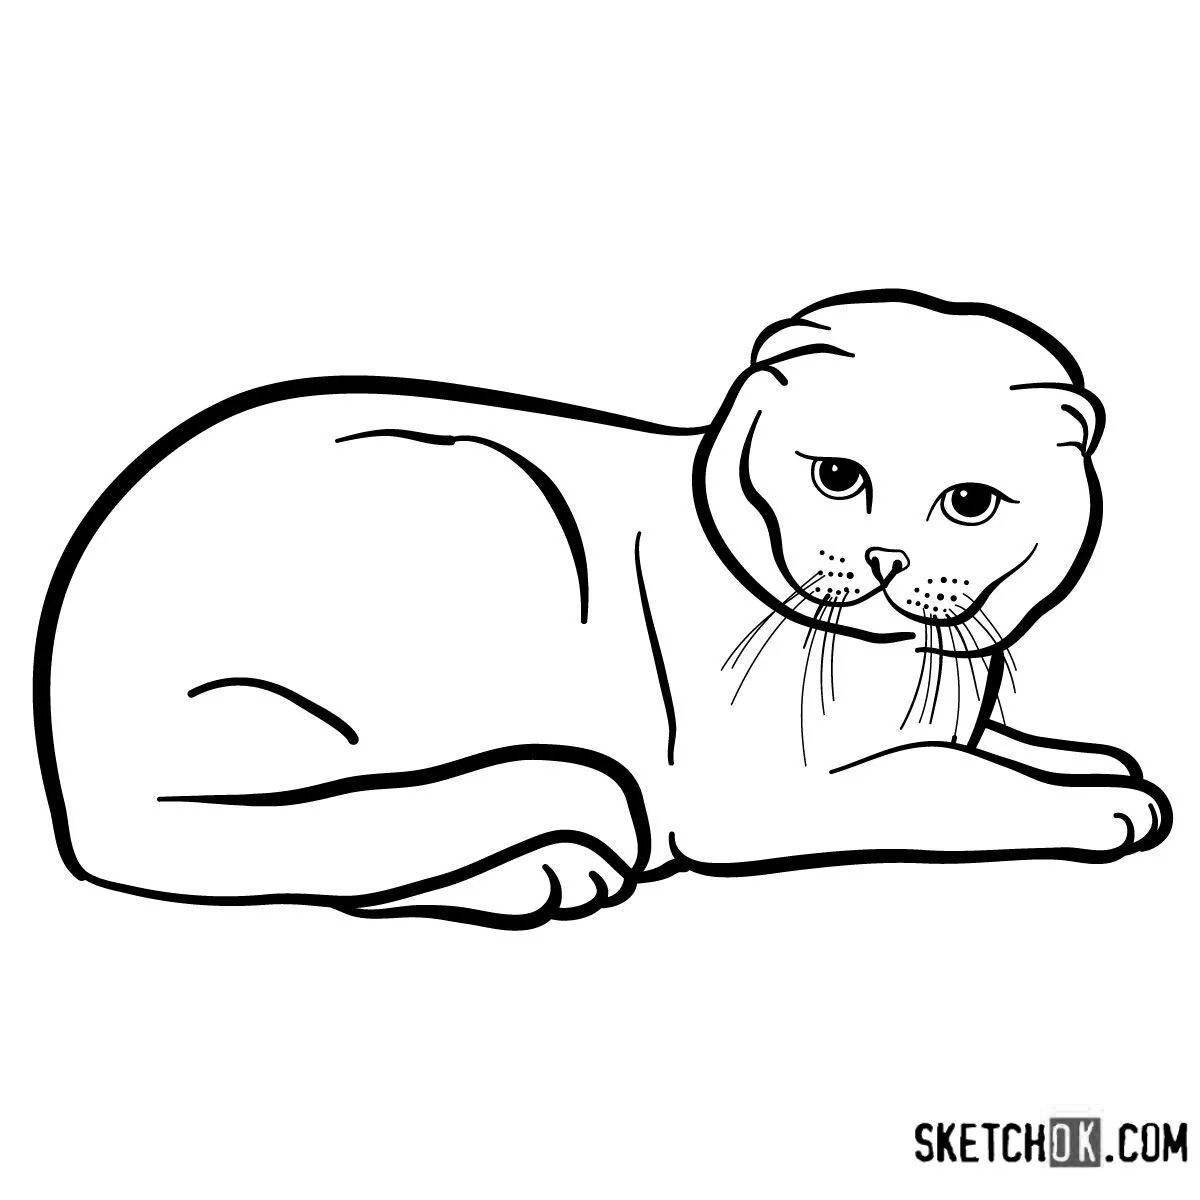 Coloring page wild scottish fold cat